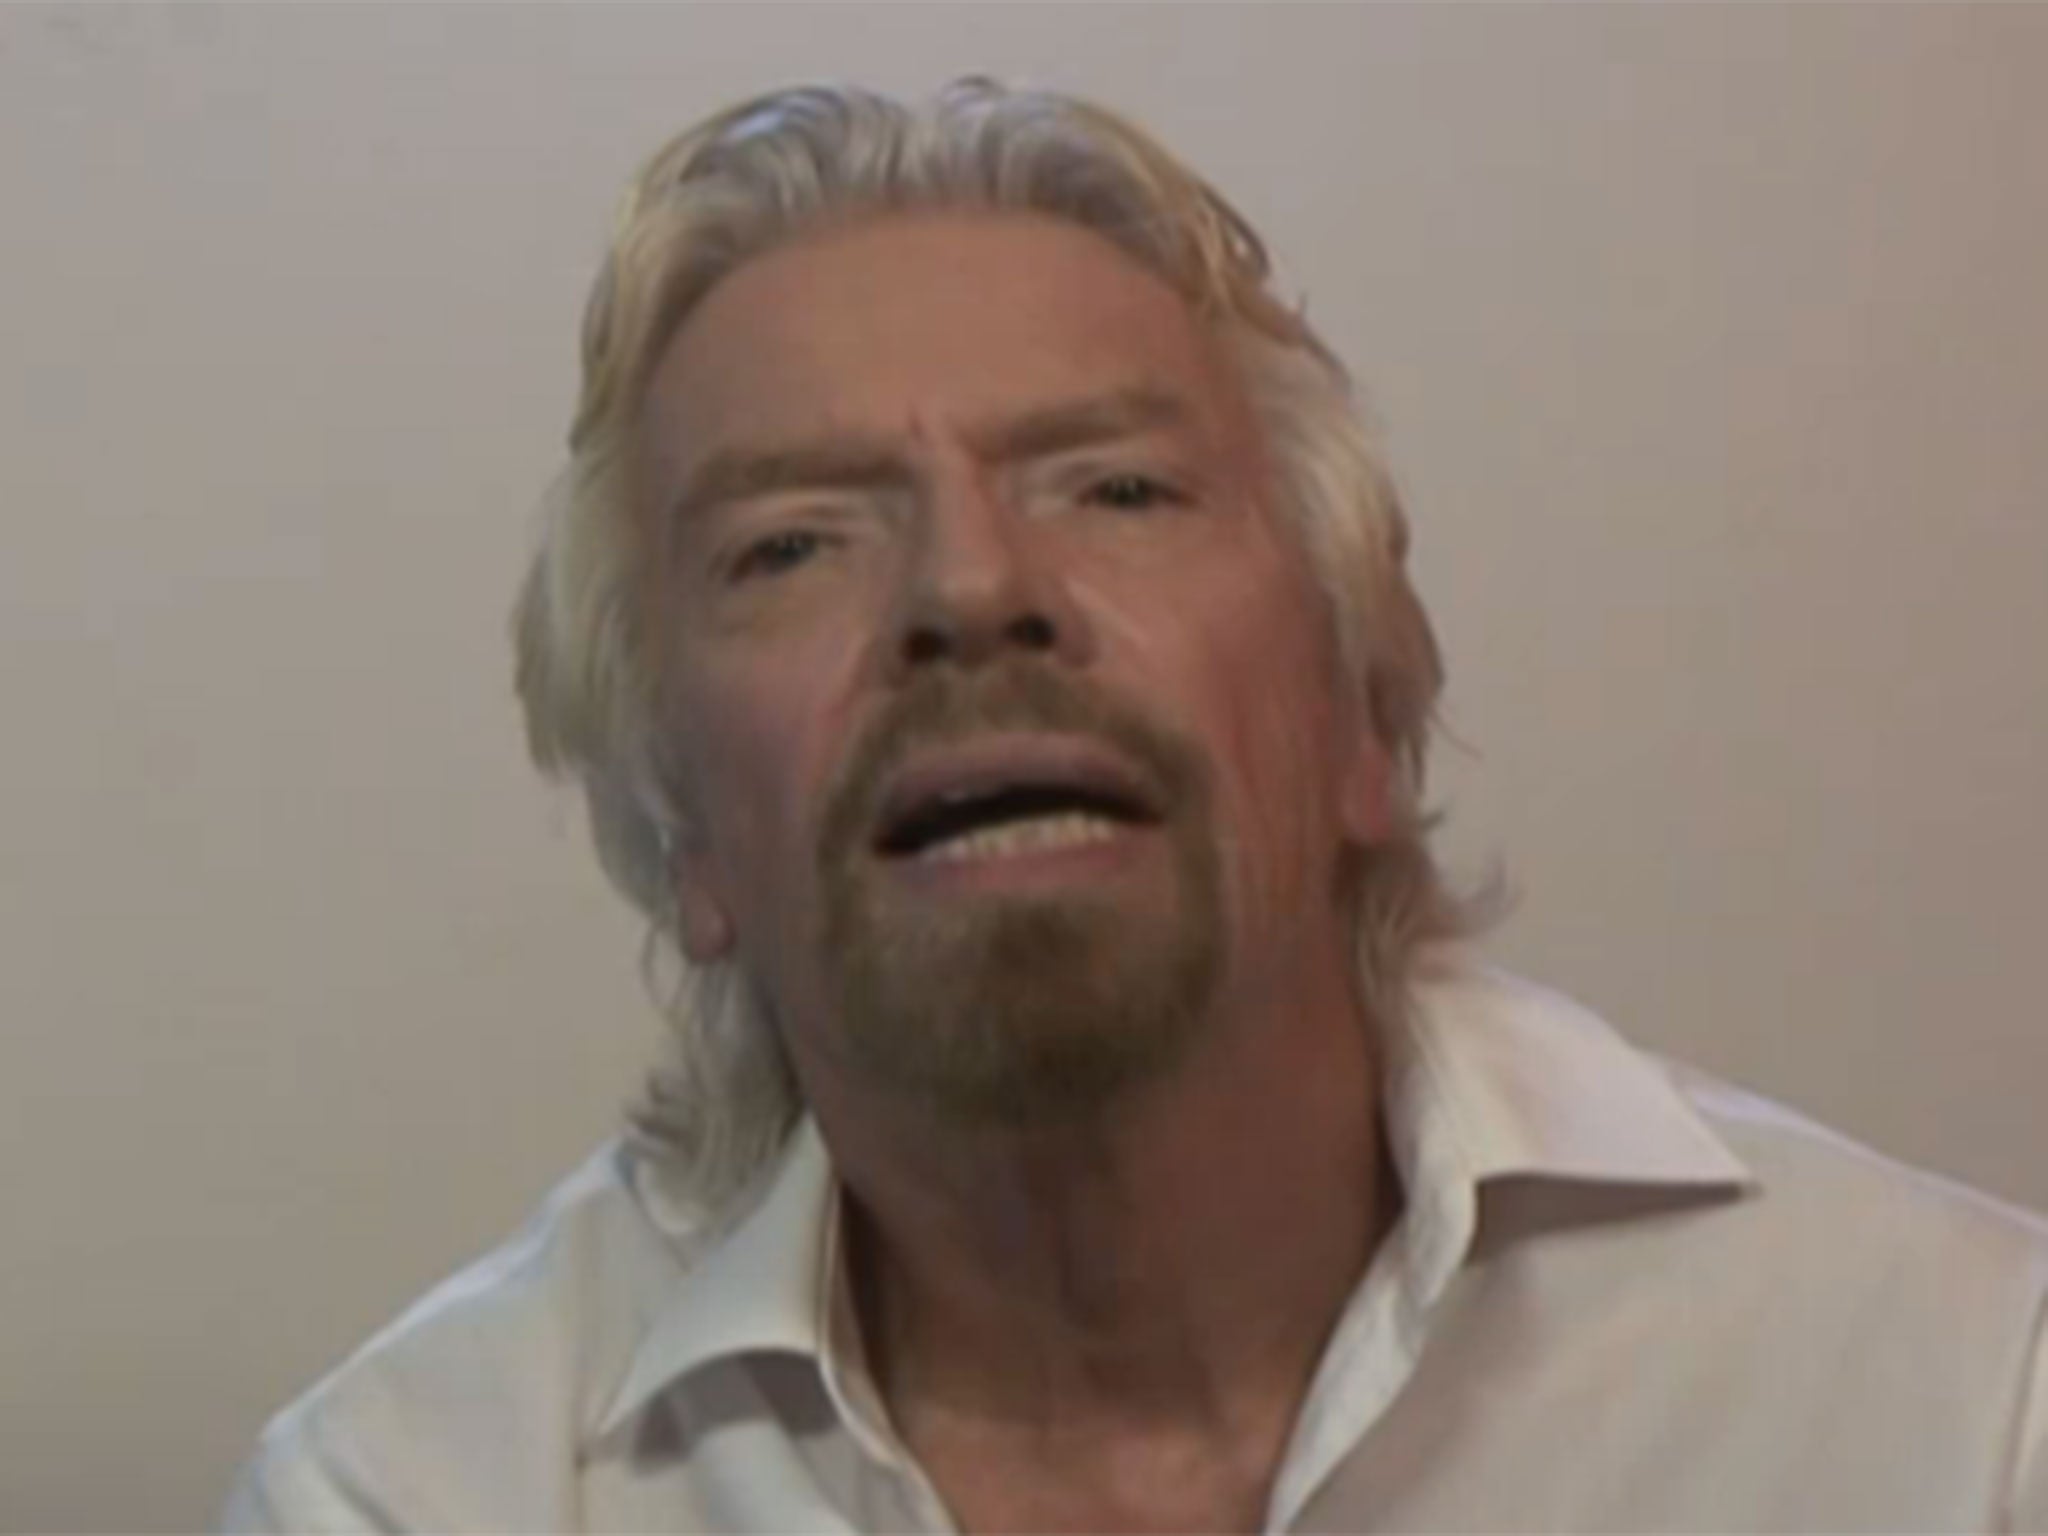 Branson said the he found the newspaper reports over the weekend 'very uncomfortable"